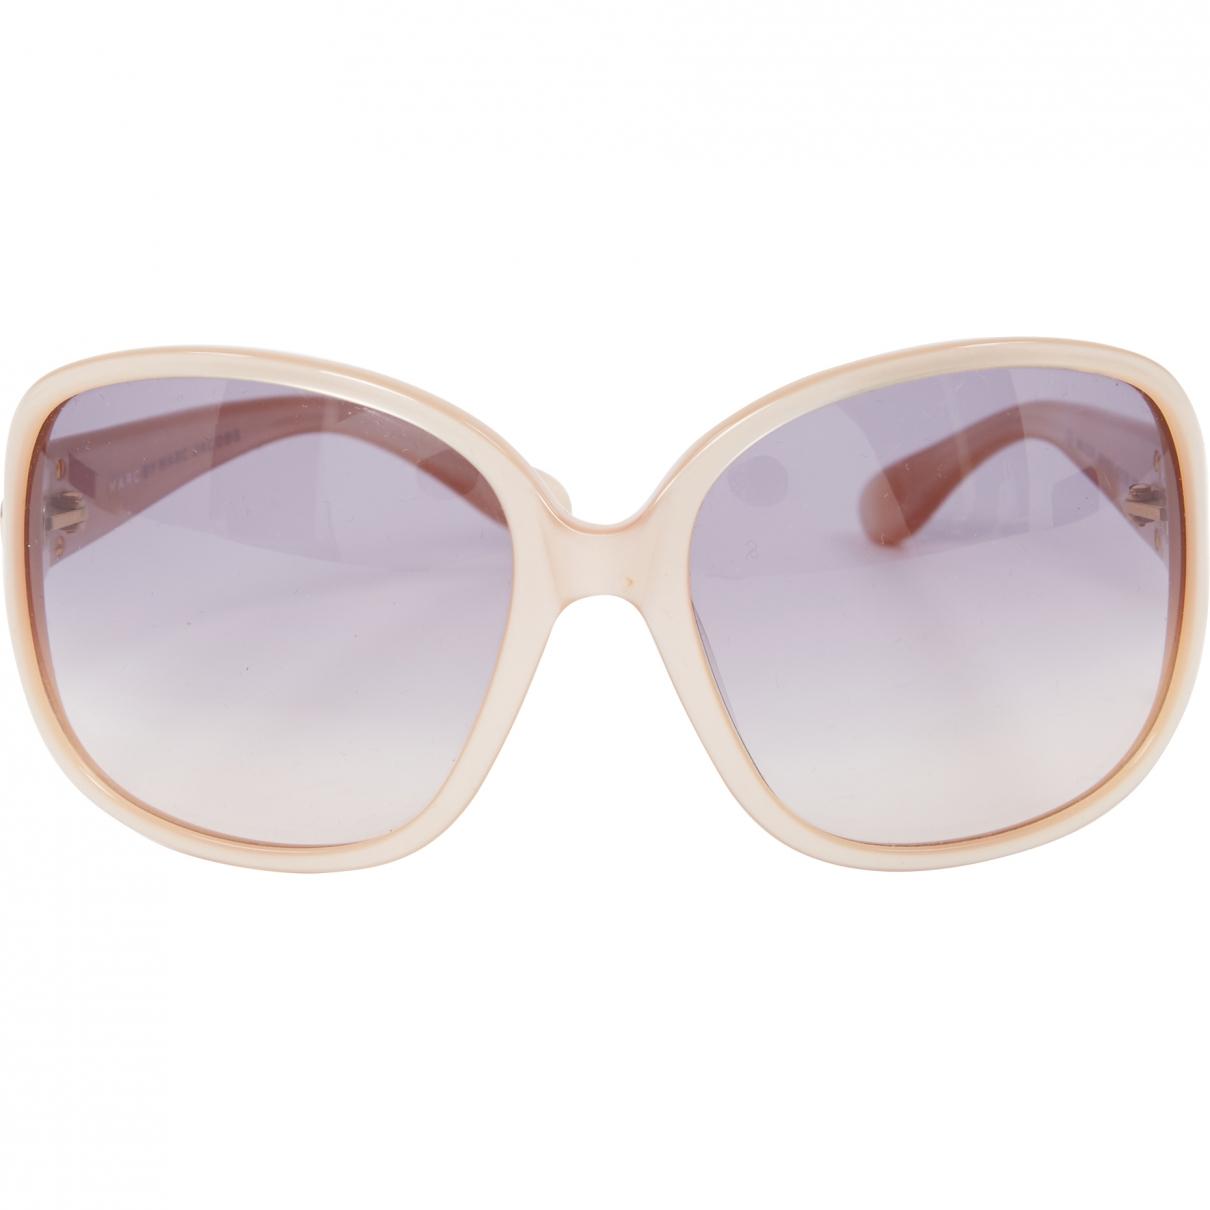 Lyst - Marc By Marc Jacobs Pink Plastic Sunglasses in Pink